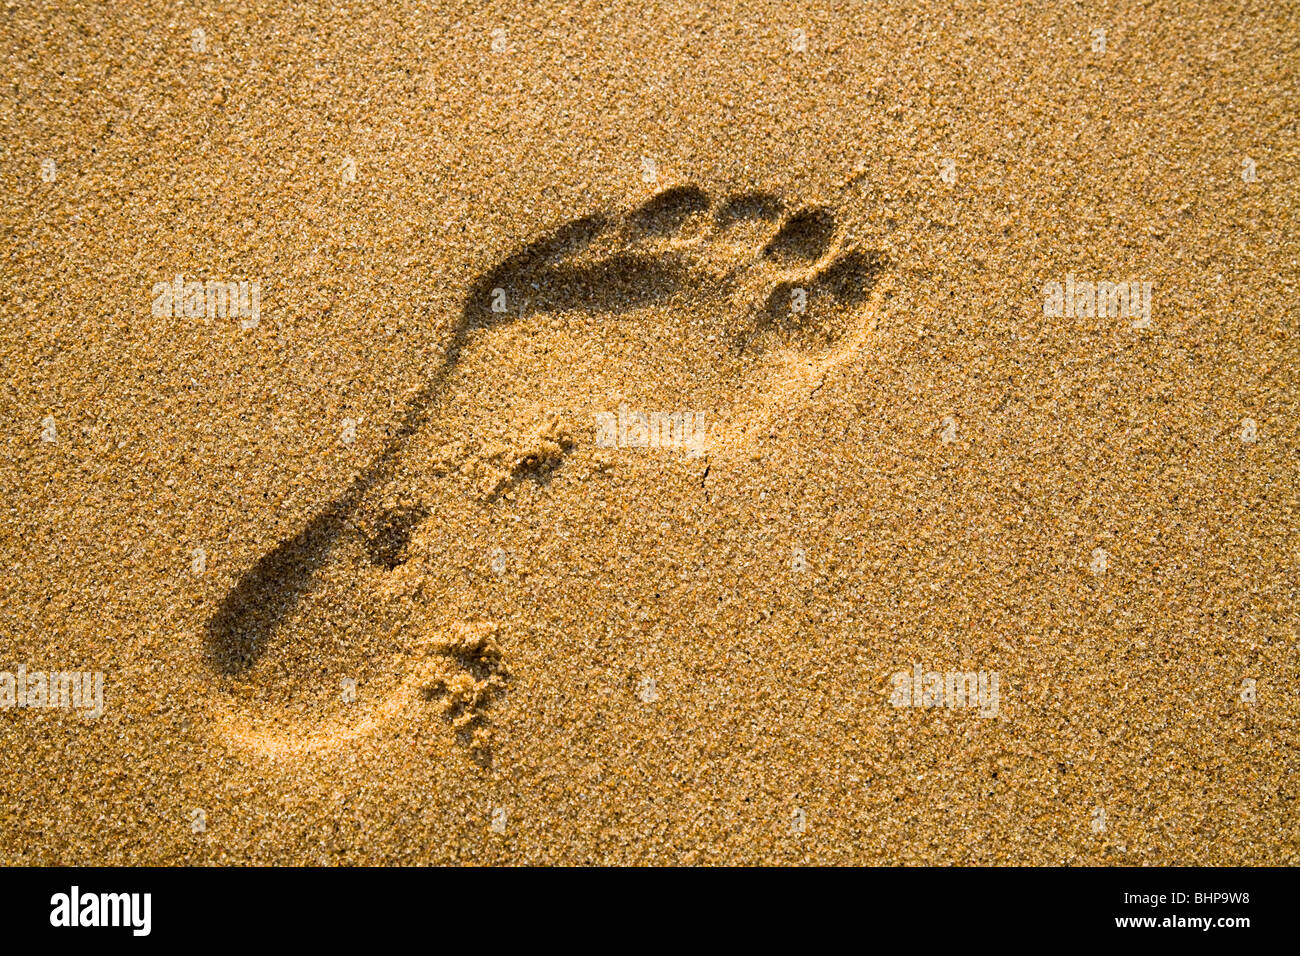 Footstep in the sand Stock Photo